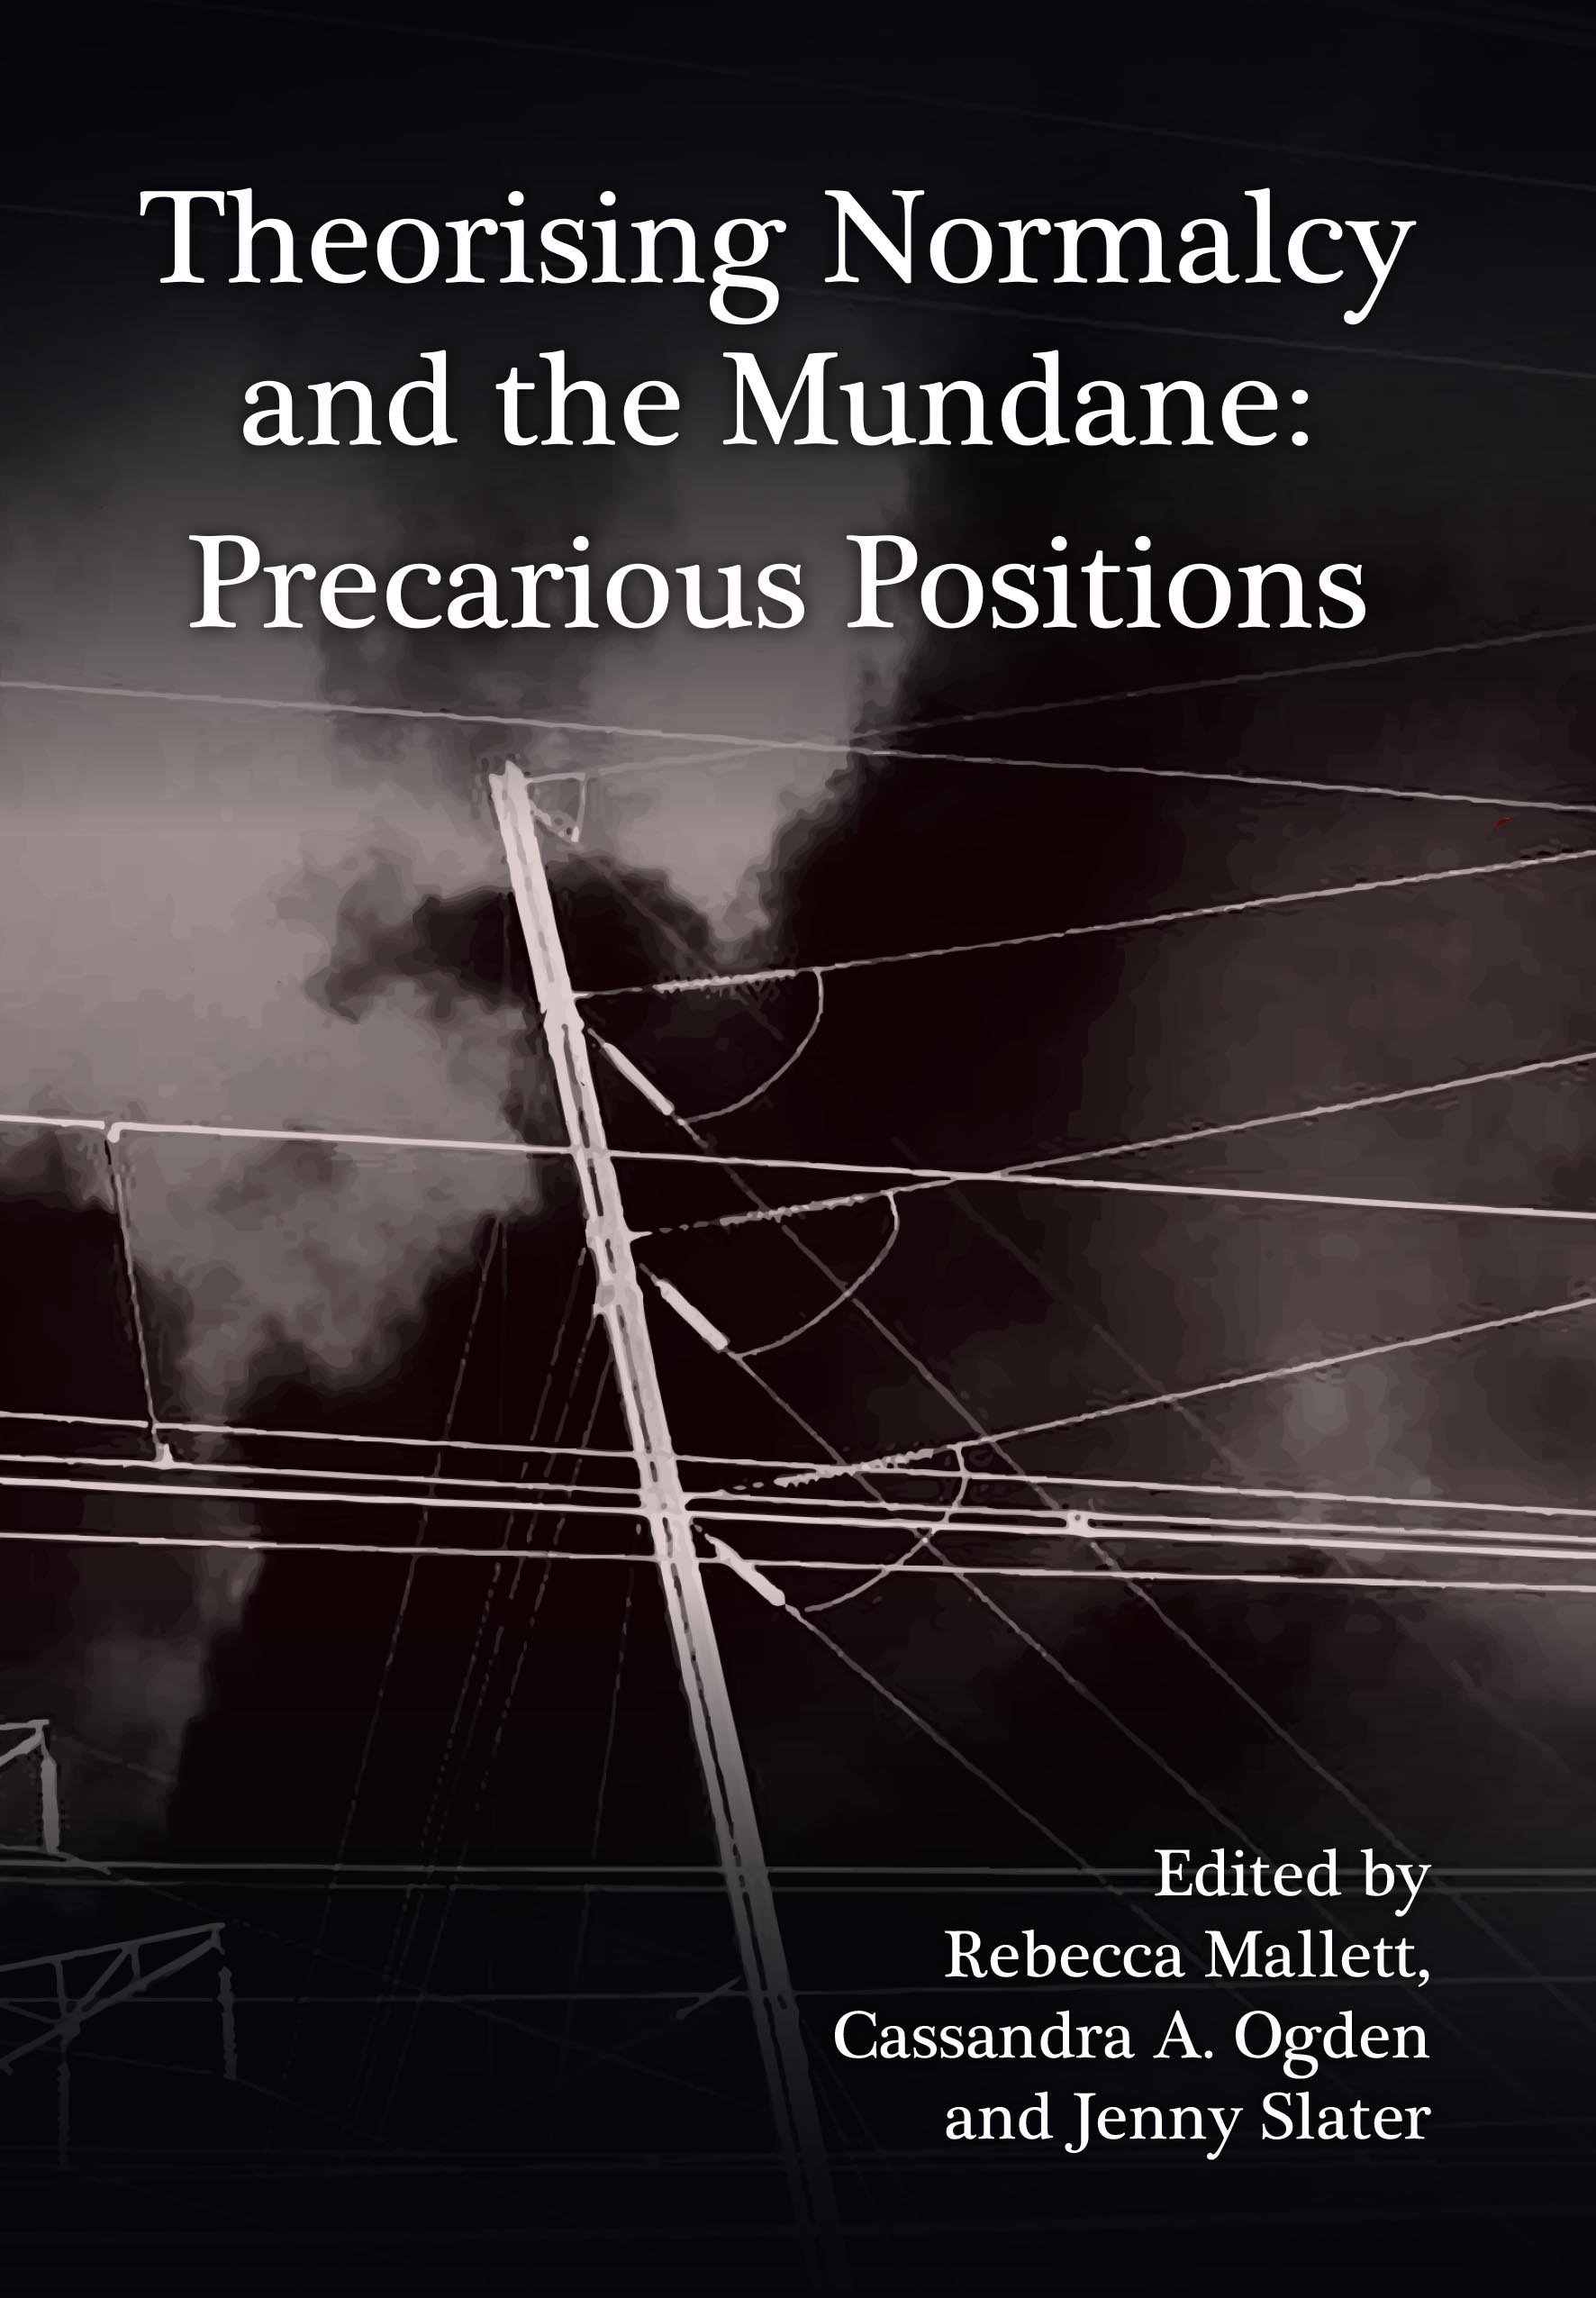 Theorising Normalcy and the Mundane: Precarious Positions